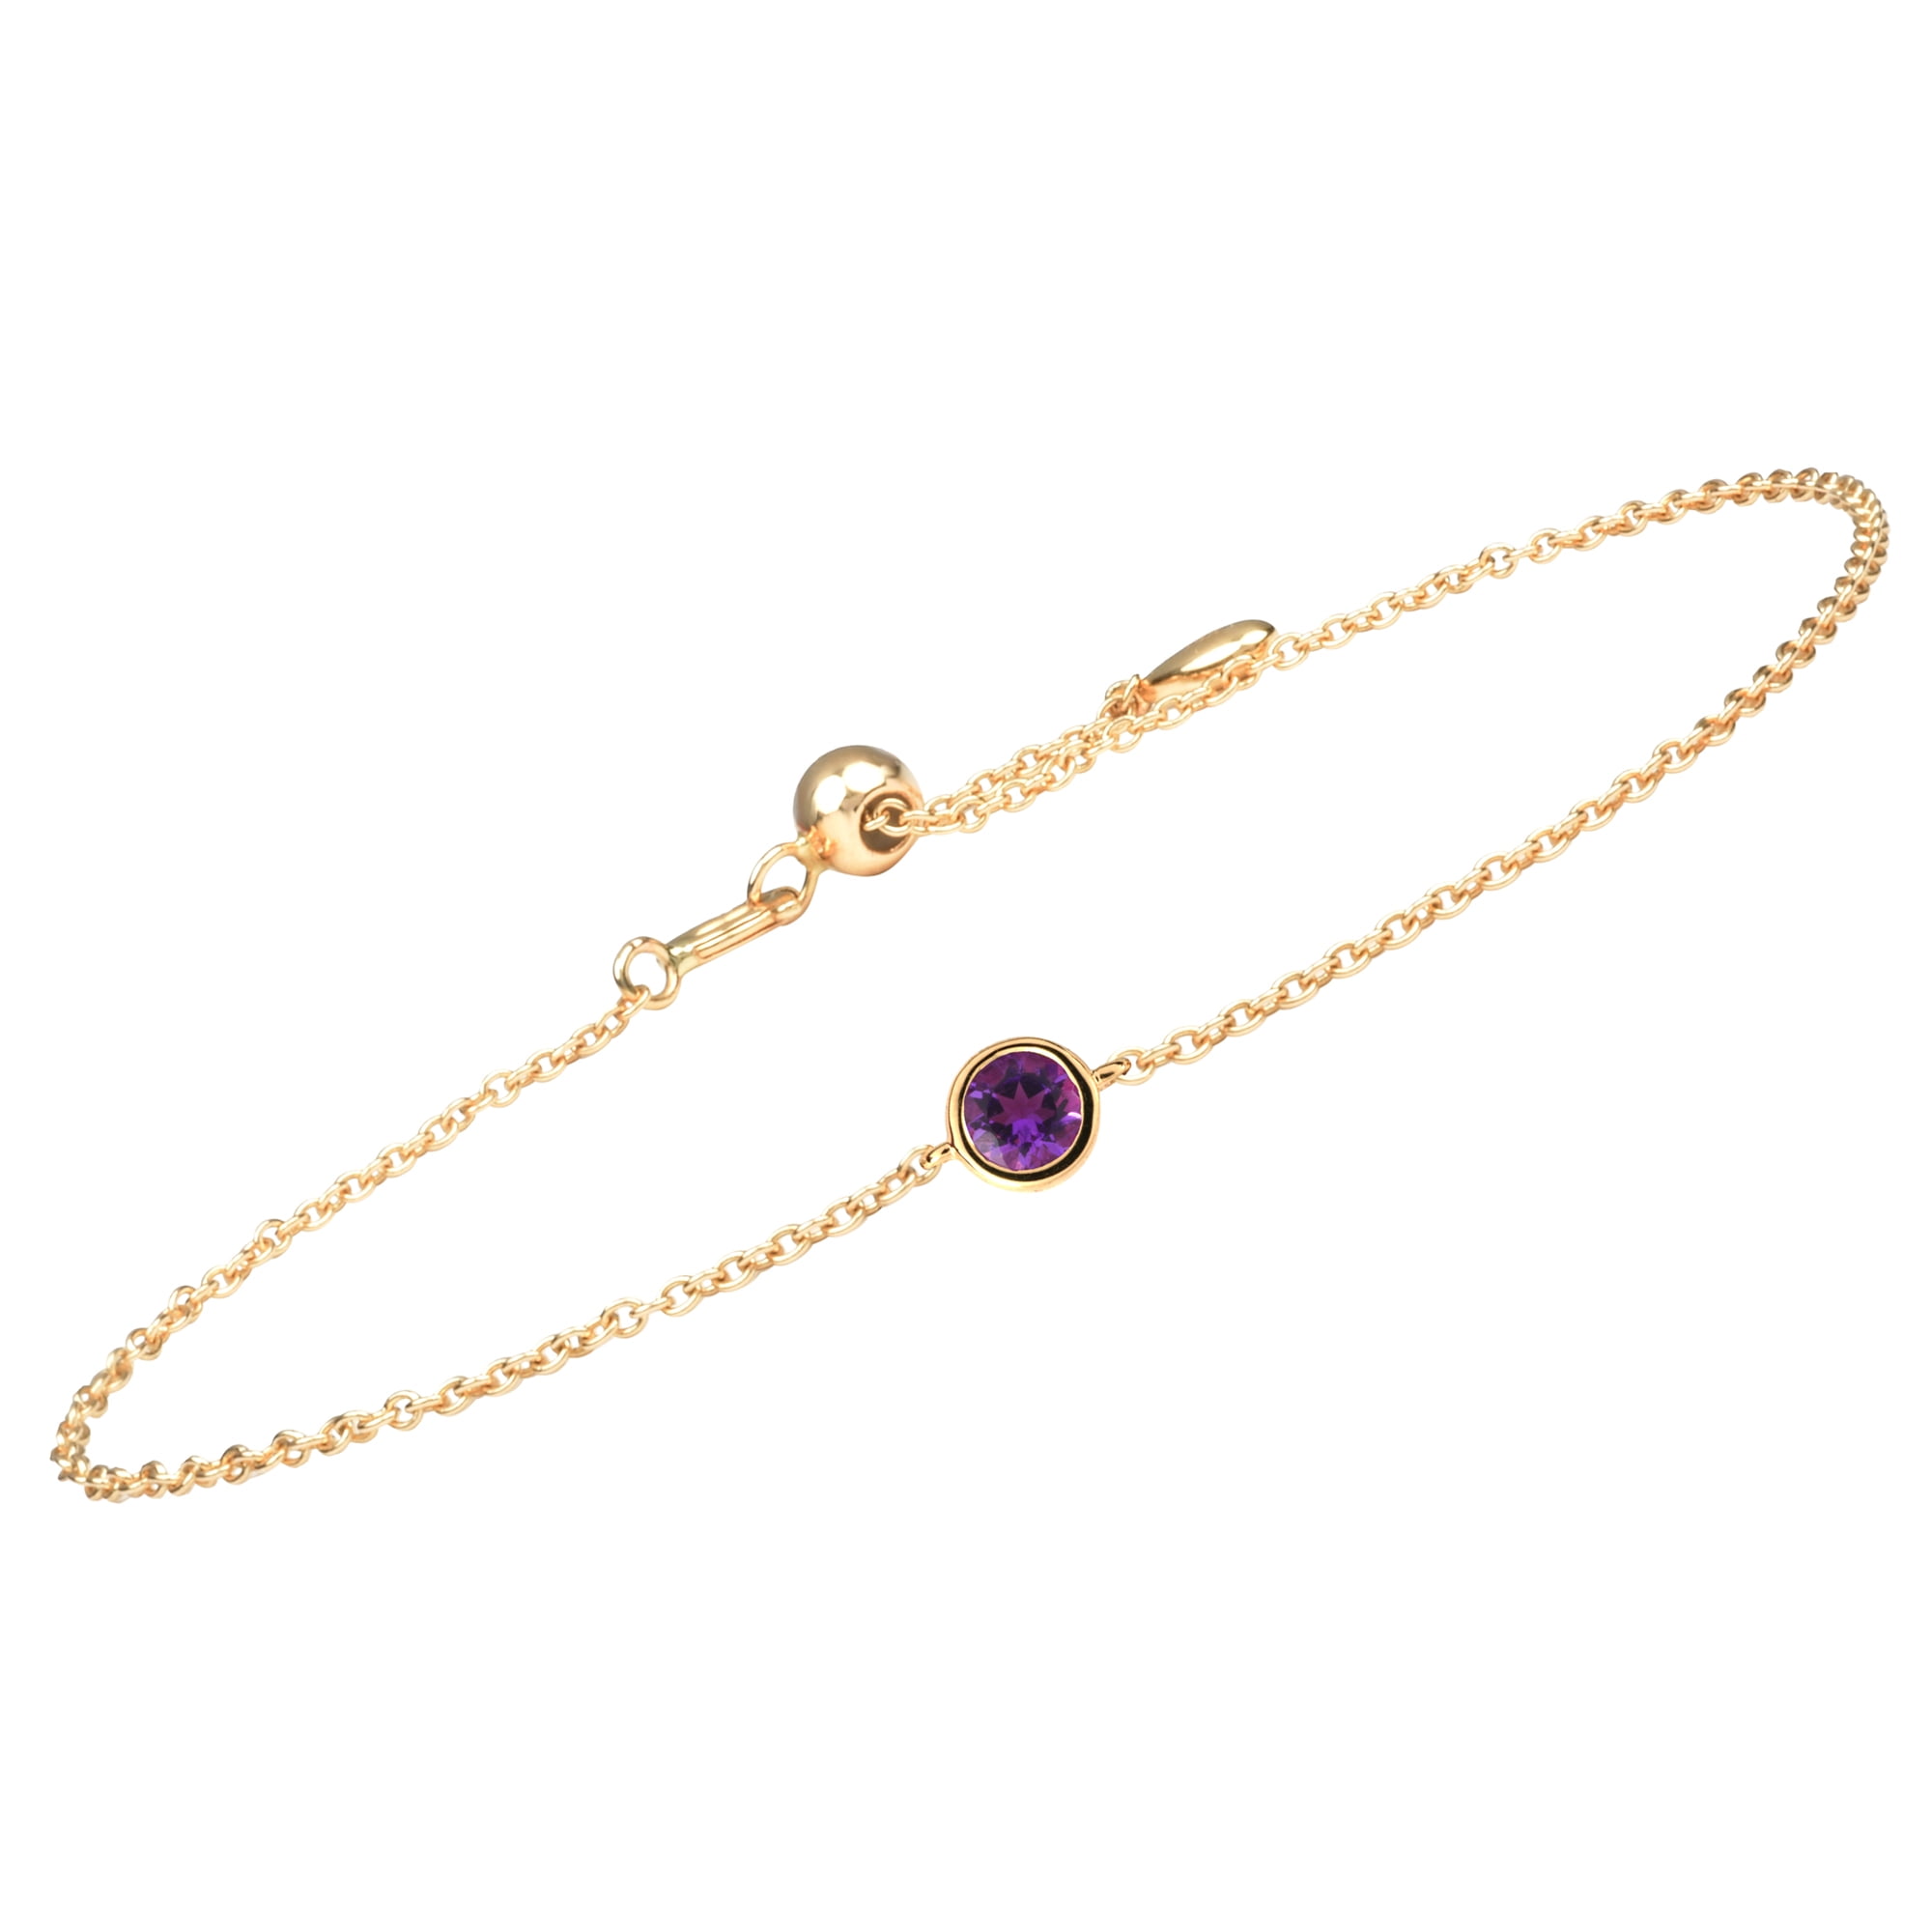 August Birthstone Adult Bracelet (3mm + 4mm Beads) 7 Inches / Gold Filled